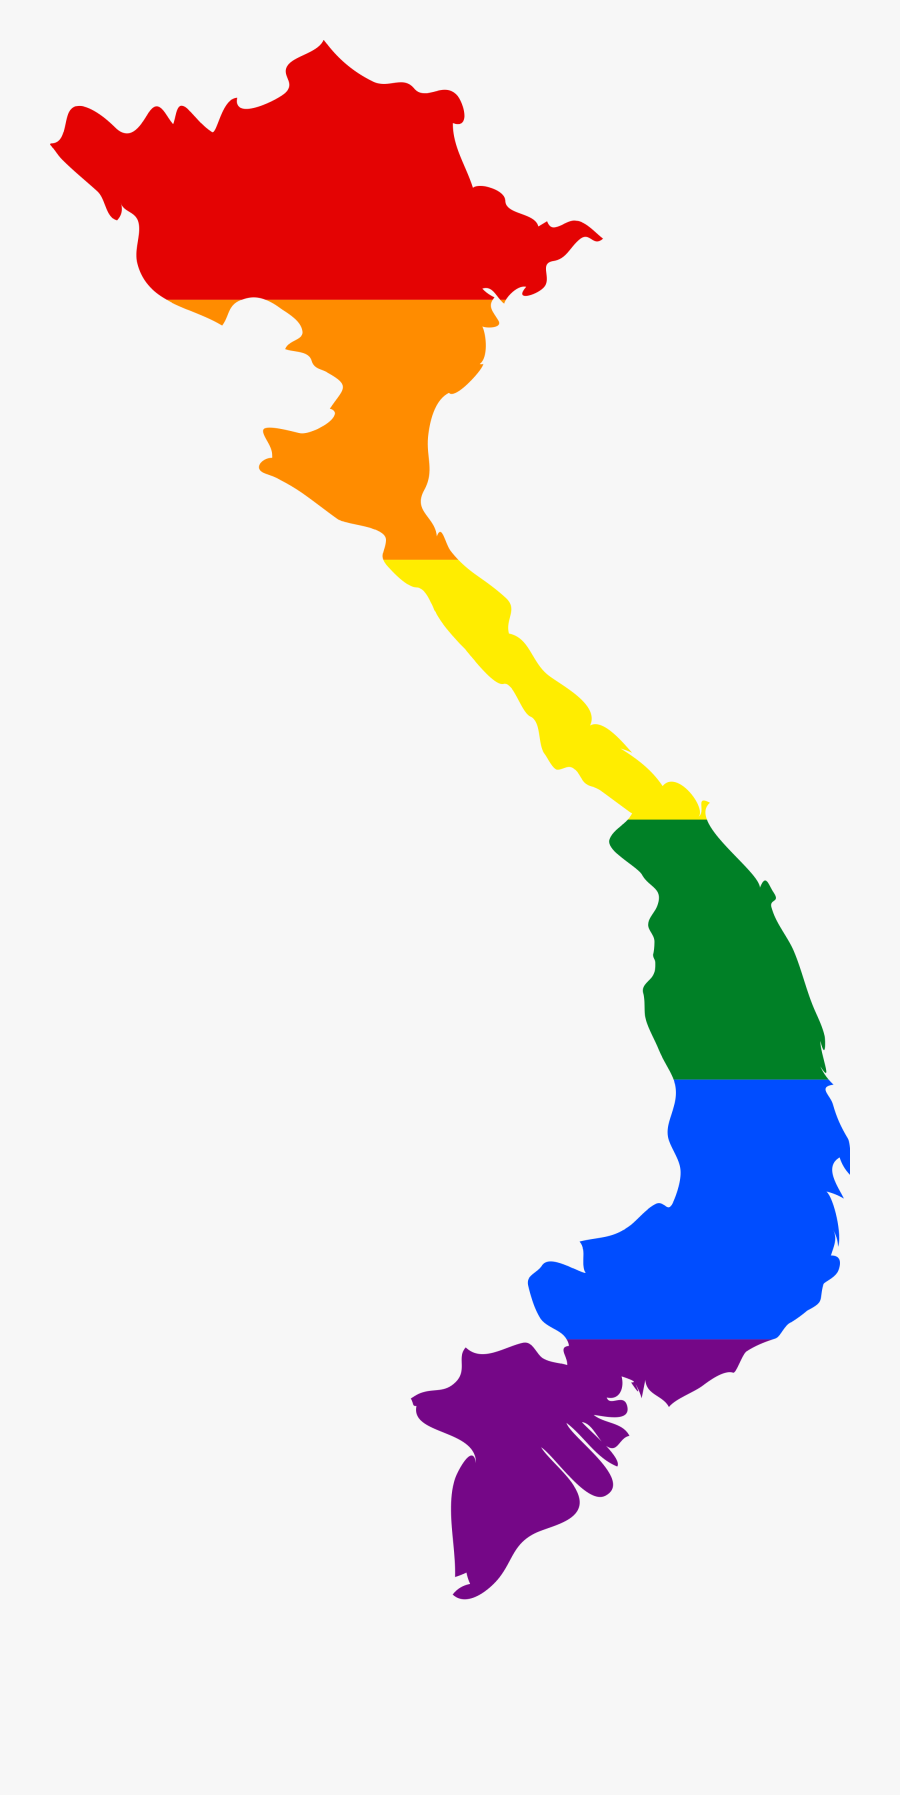 Gender Identity And Expression[edit] - Vietnam Map Grey, Transparent Clipart